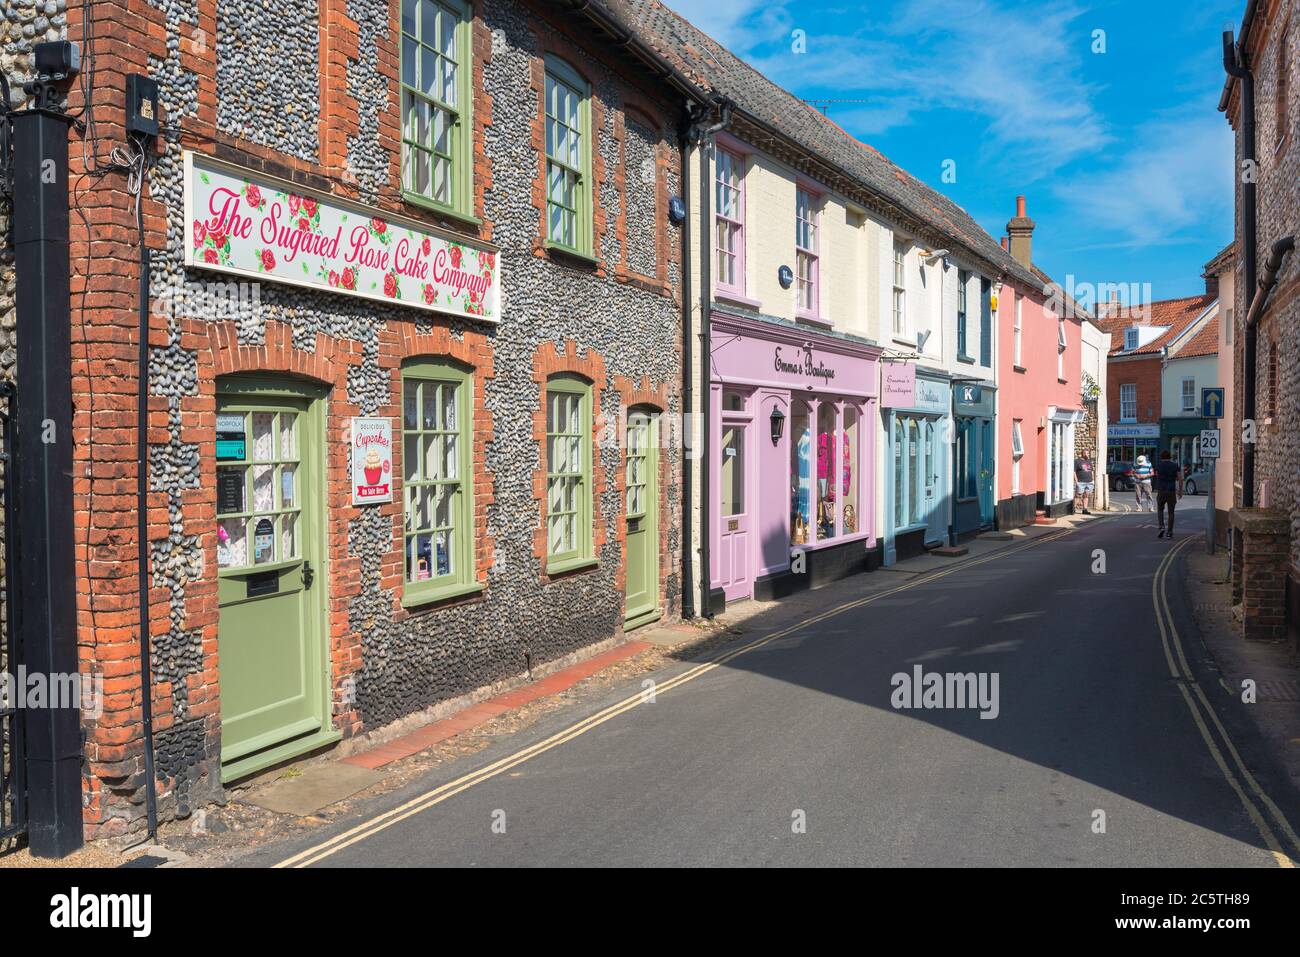 Holt shops, view of a row of bijou shops in Albert Street in the centre of  Holt village, Norfolk, East Anglia, England UK Stock Photo - Alamy